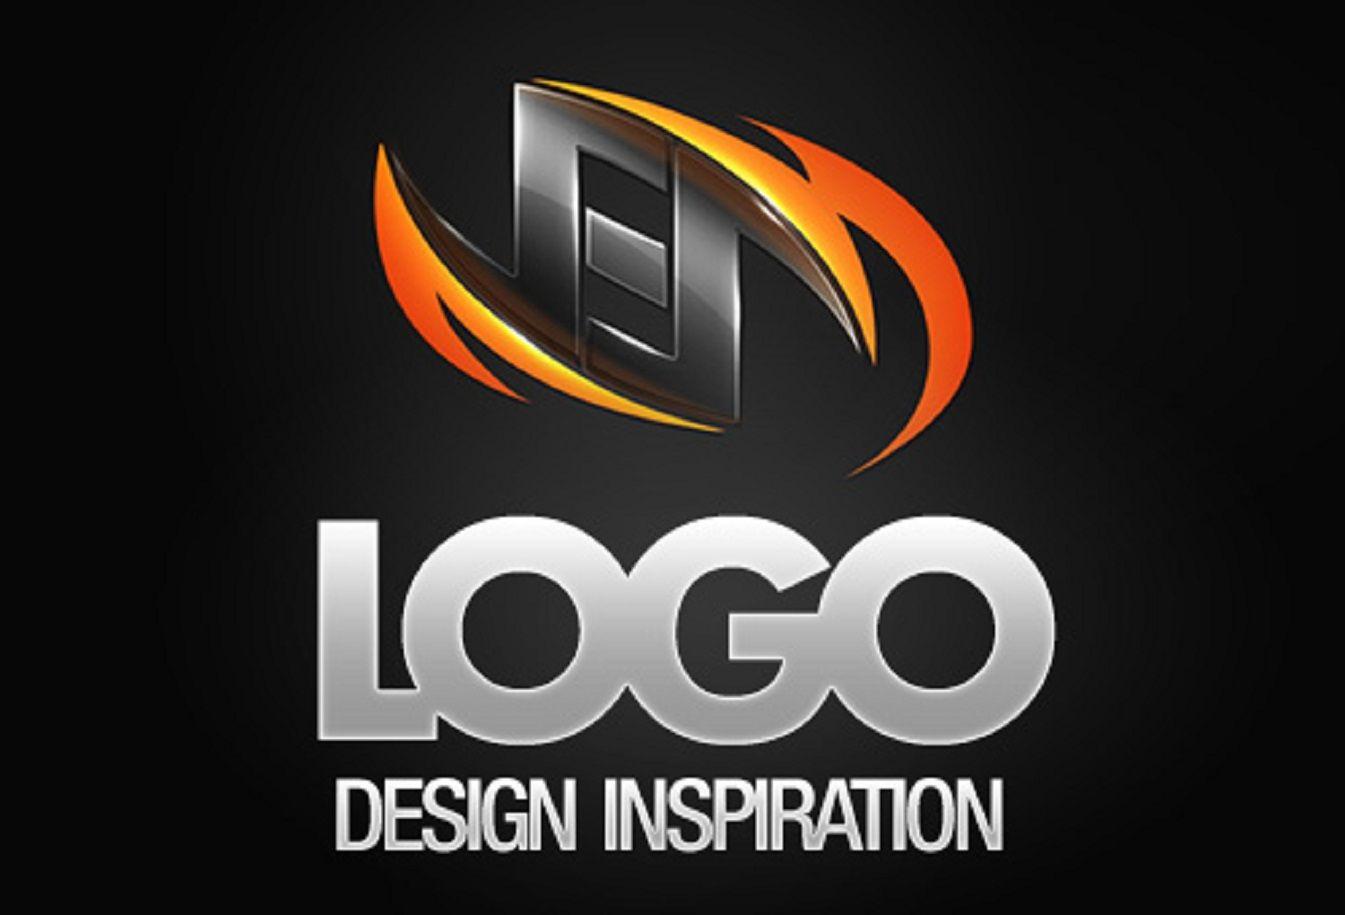 Awesome Z Logo - I will design 2 AWESOME and Professional logo design Concepts for ...